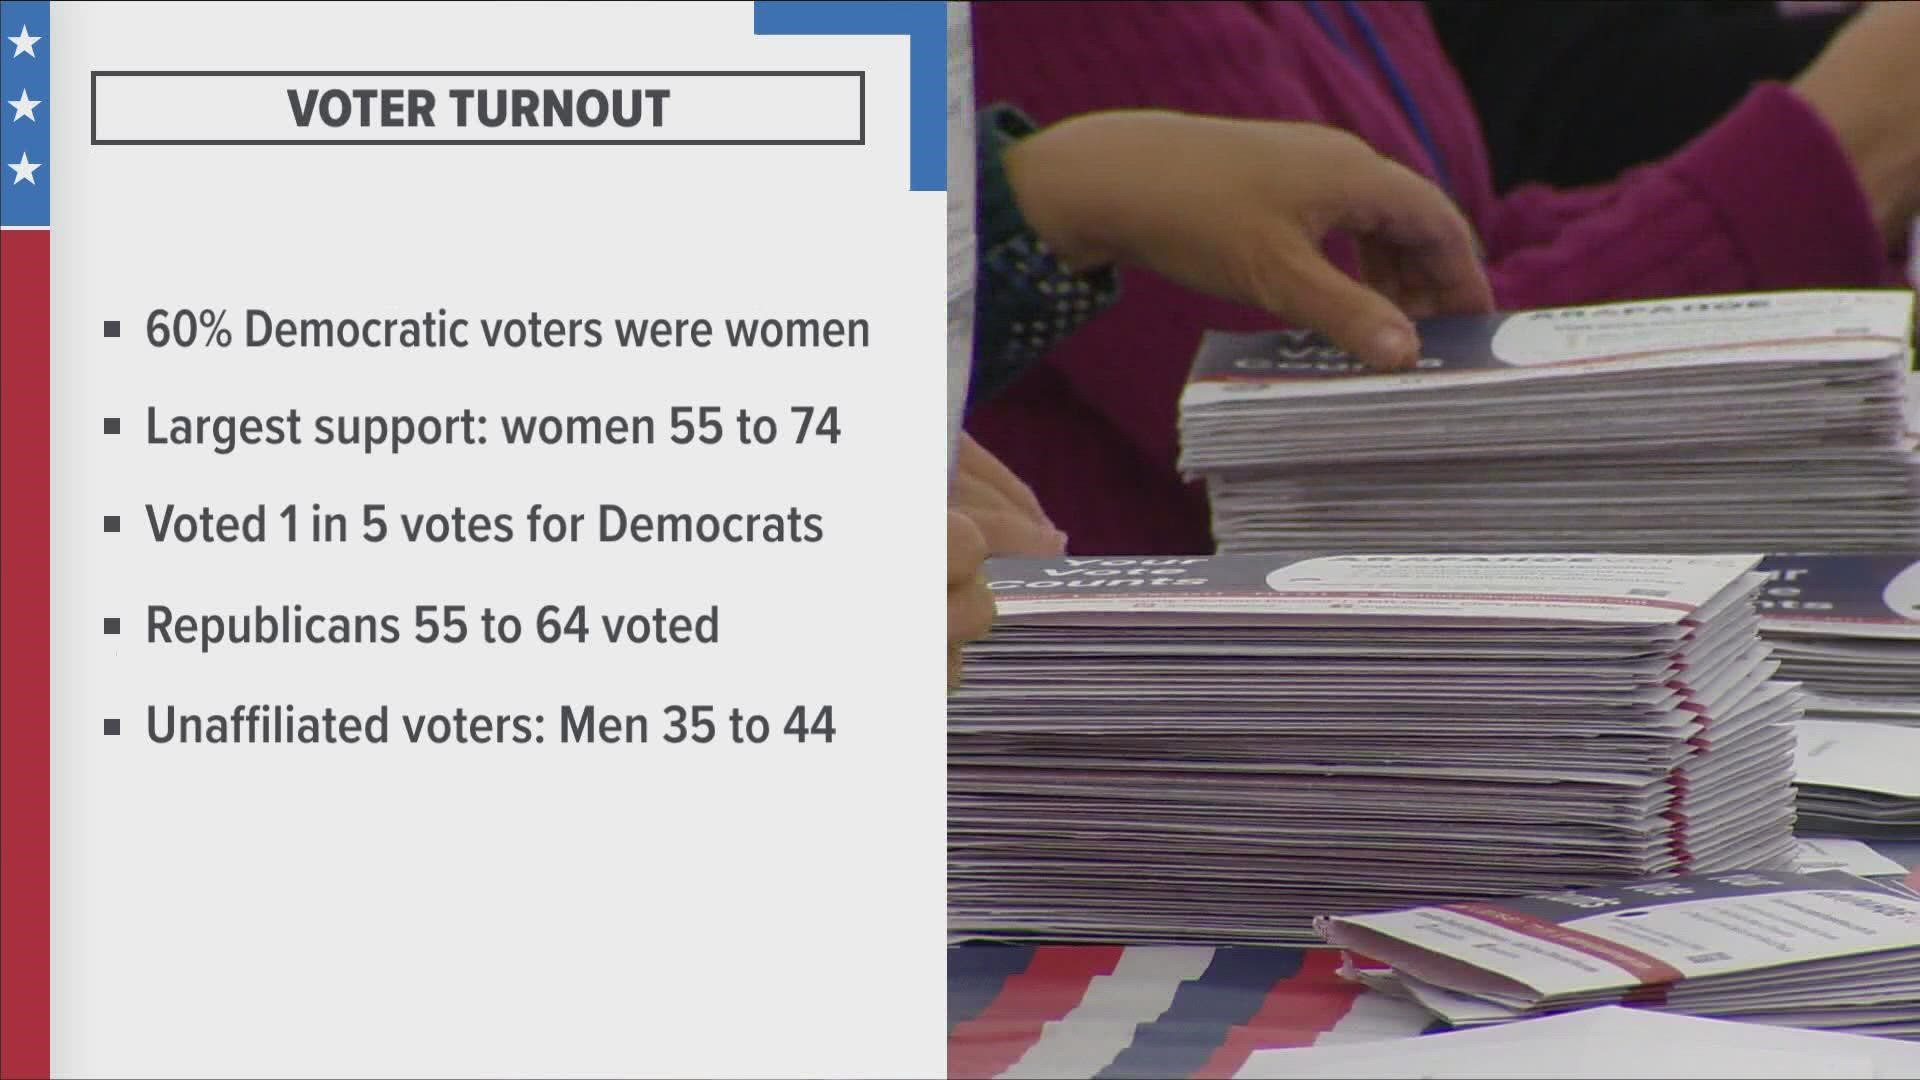 Here's what we know so far about voter turnout in Colorado, according to analysis from the SOS office.